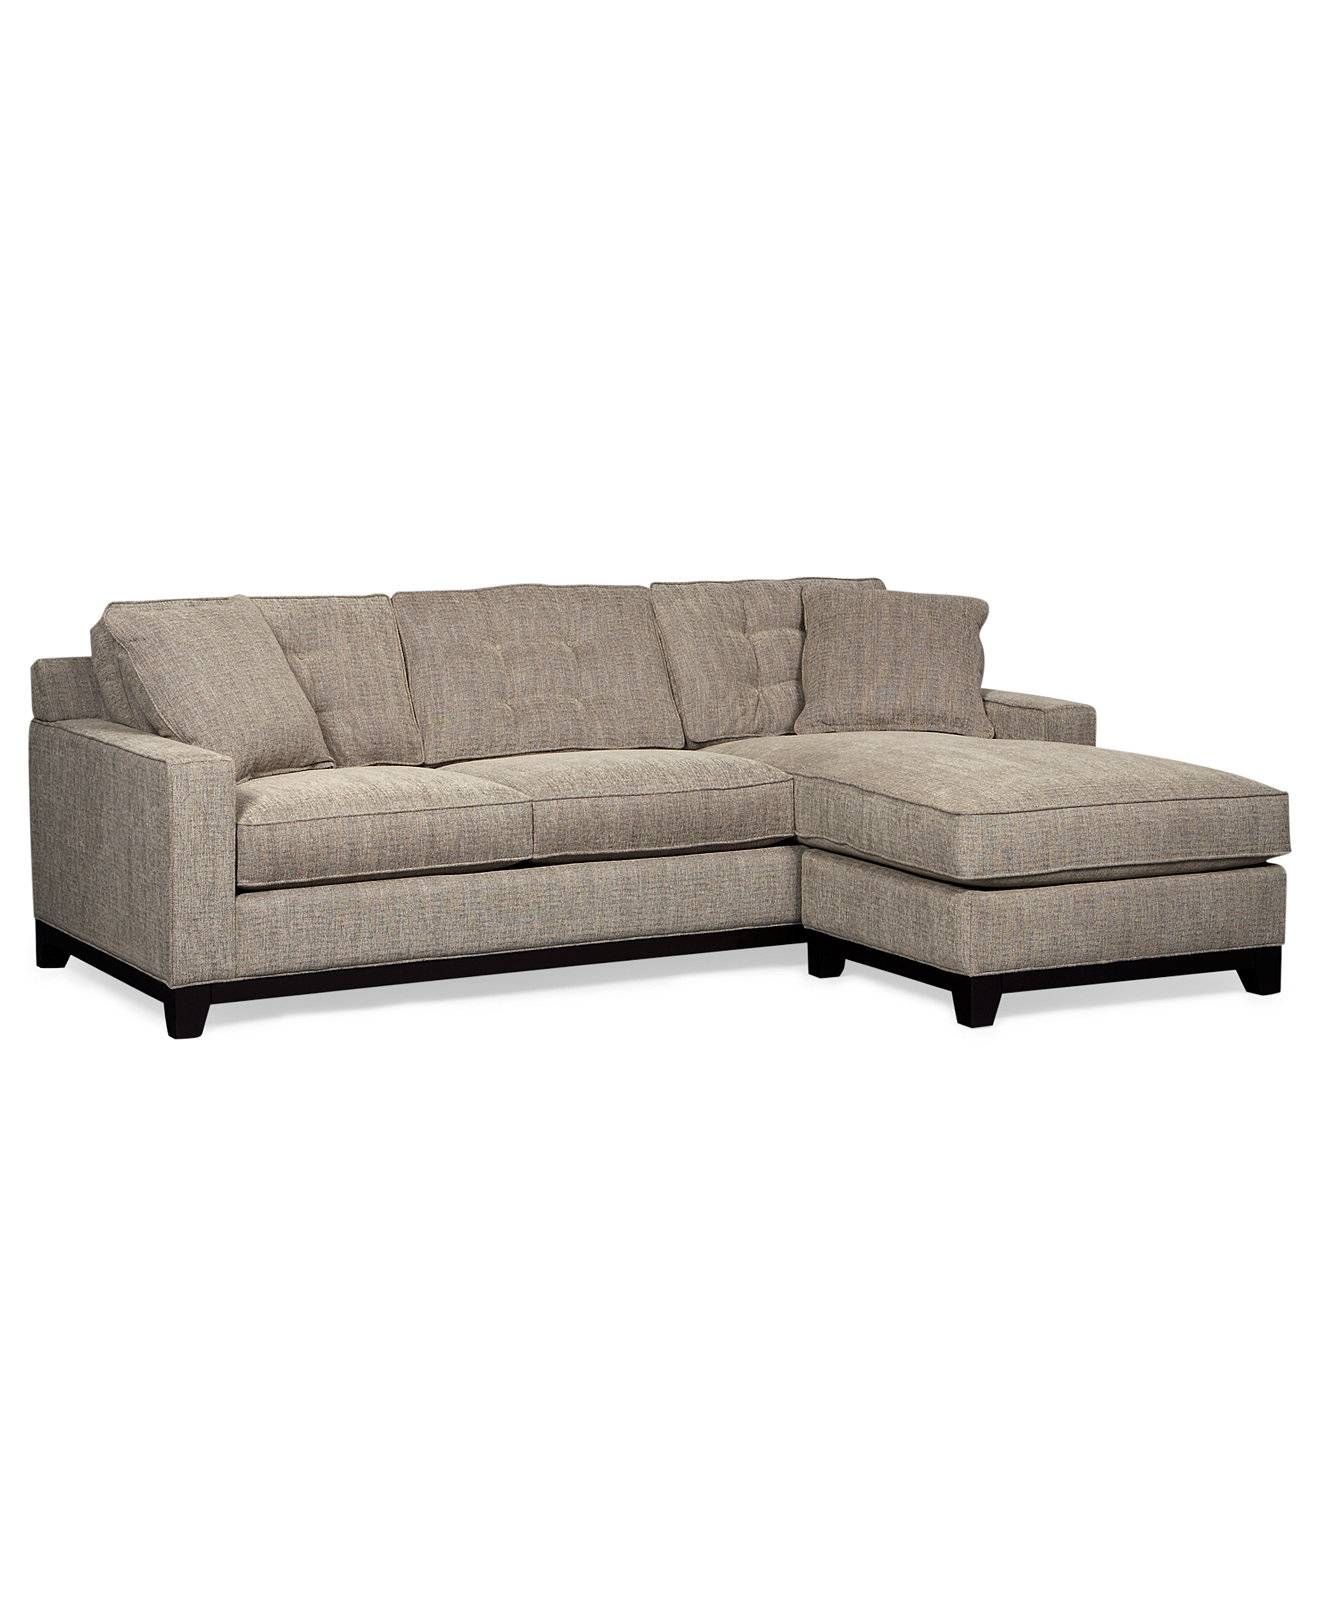 Sofas: Macys Furniture Sofa Bed | Sectional Sleeper Sofa Queen Regarding Sleeper Sectional Sofas (Photo 26 of 30)